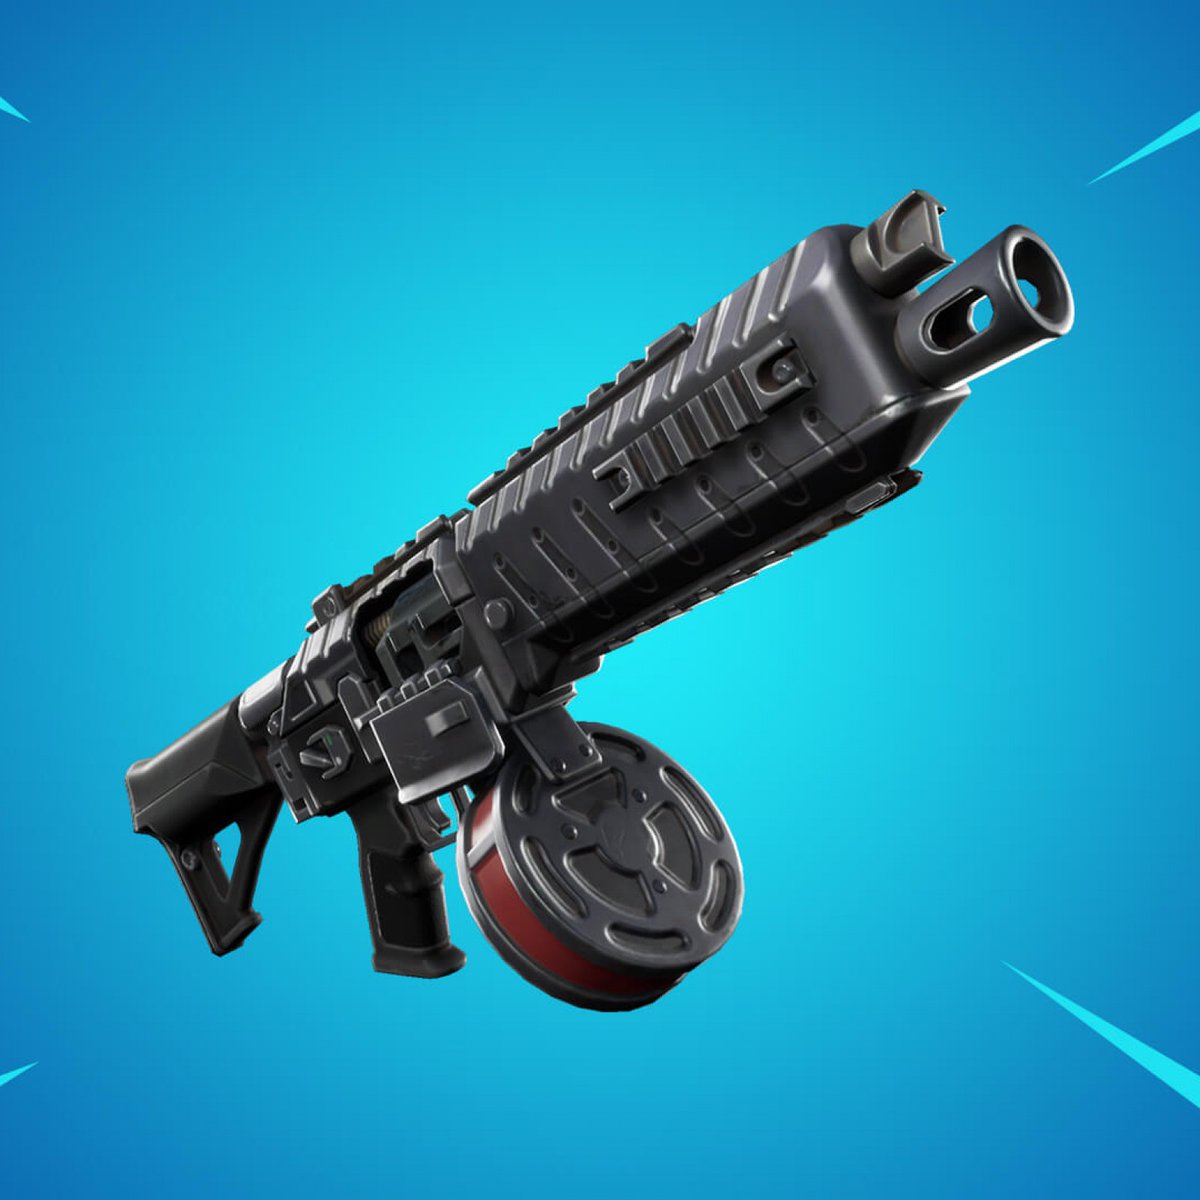 Fn community really out here treating this gun like it's a hell spawn or something, chill, it's not THAT bad (except the mythic)

People complain about the Drum but i've never seen a single person complain about the pump doing 200 in the head (a literal instakill back then)